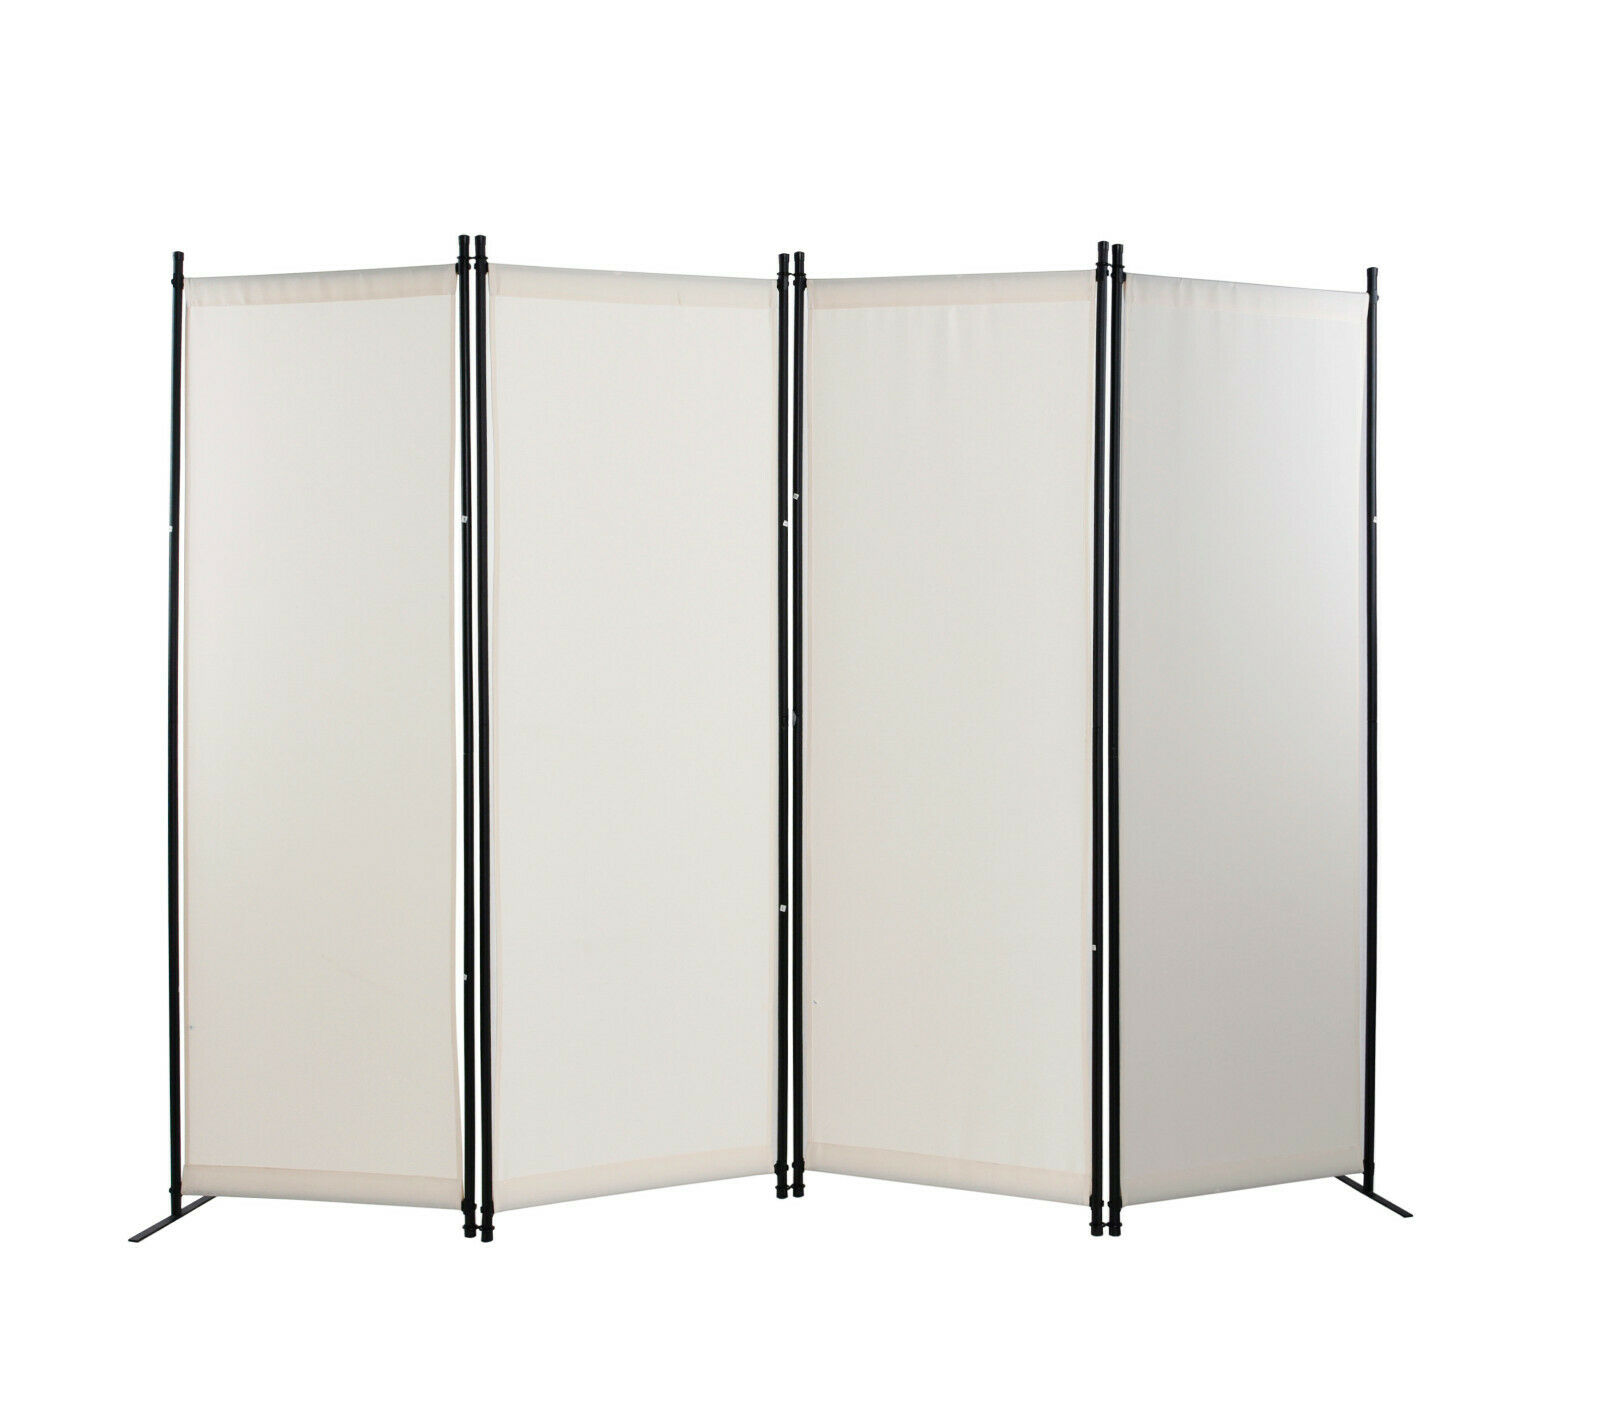 4 Panel Room Divider Privacy Screens Home Office Accents Furniture Folding Steel